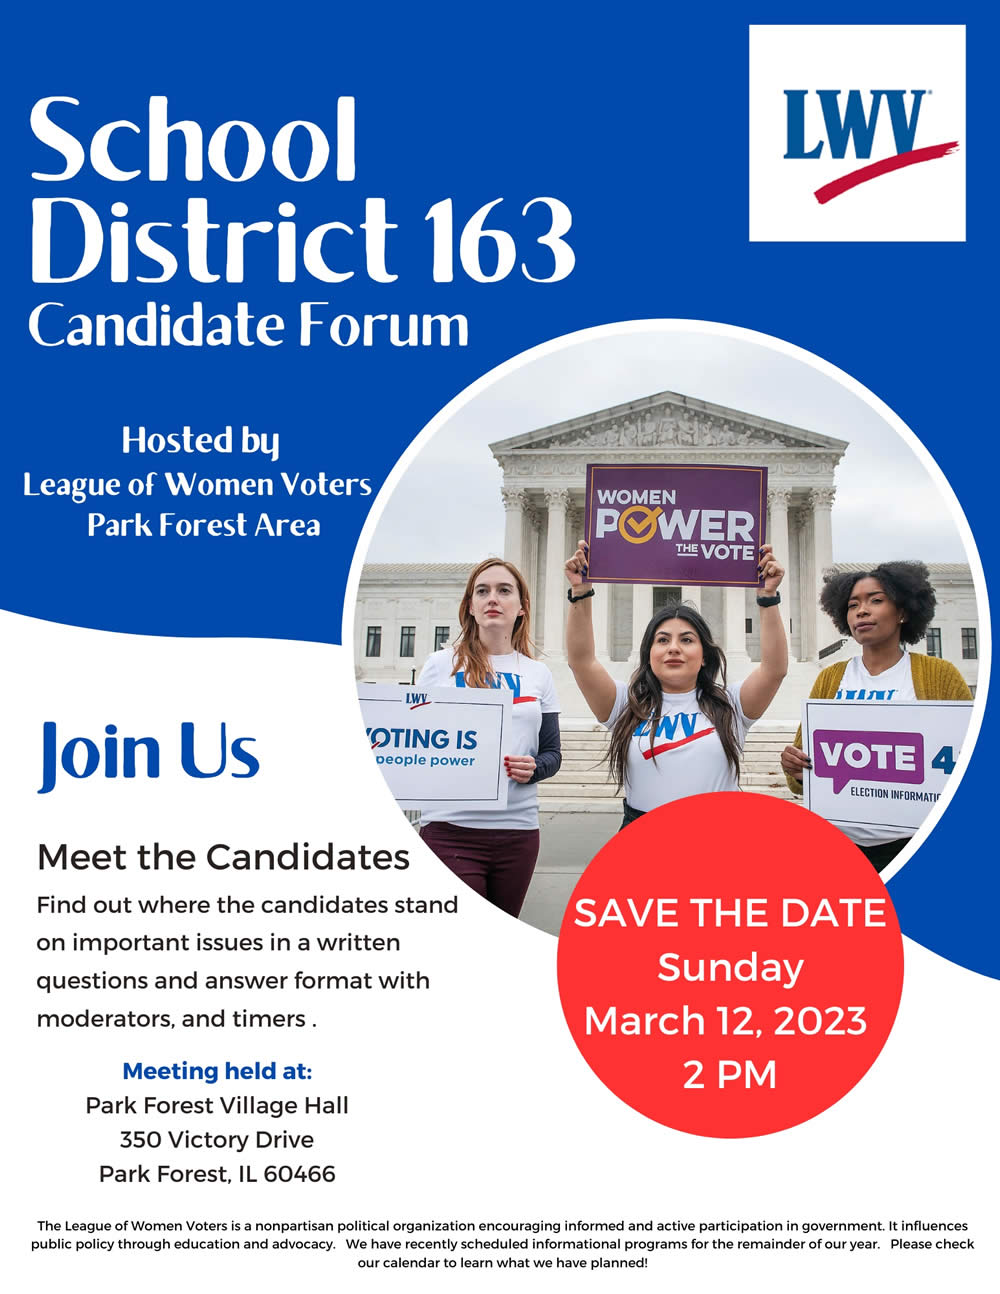 Meet the SD 163 Candidates Sunday in Park Forest.